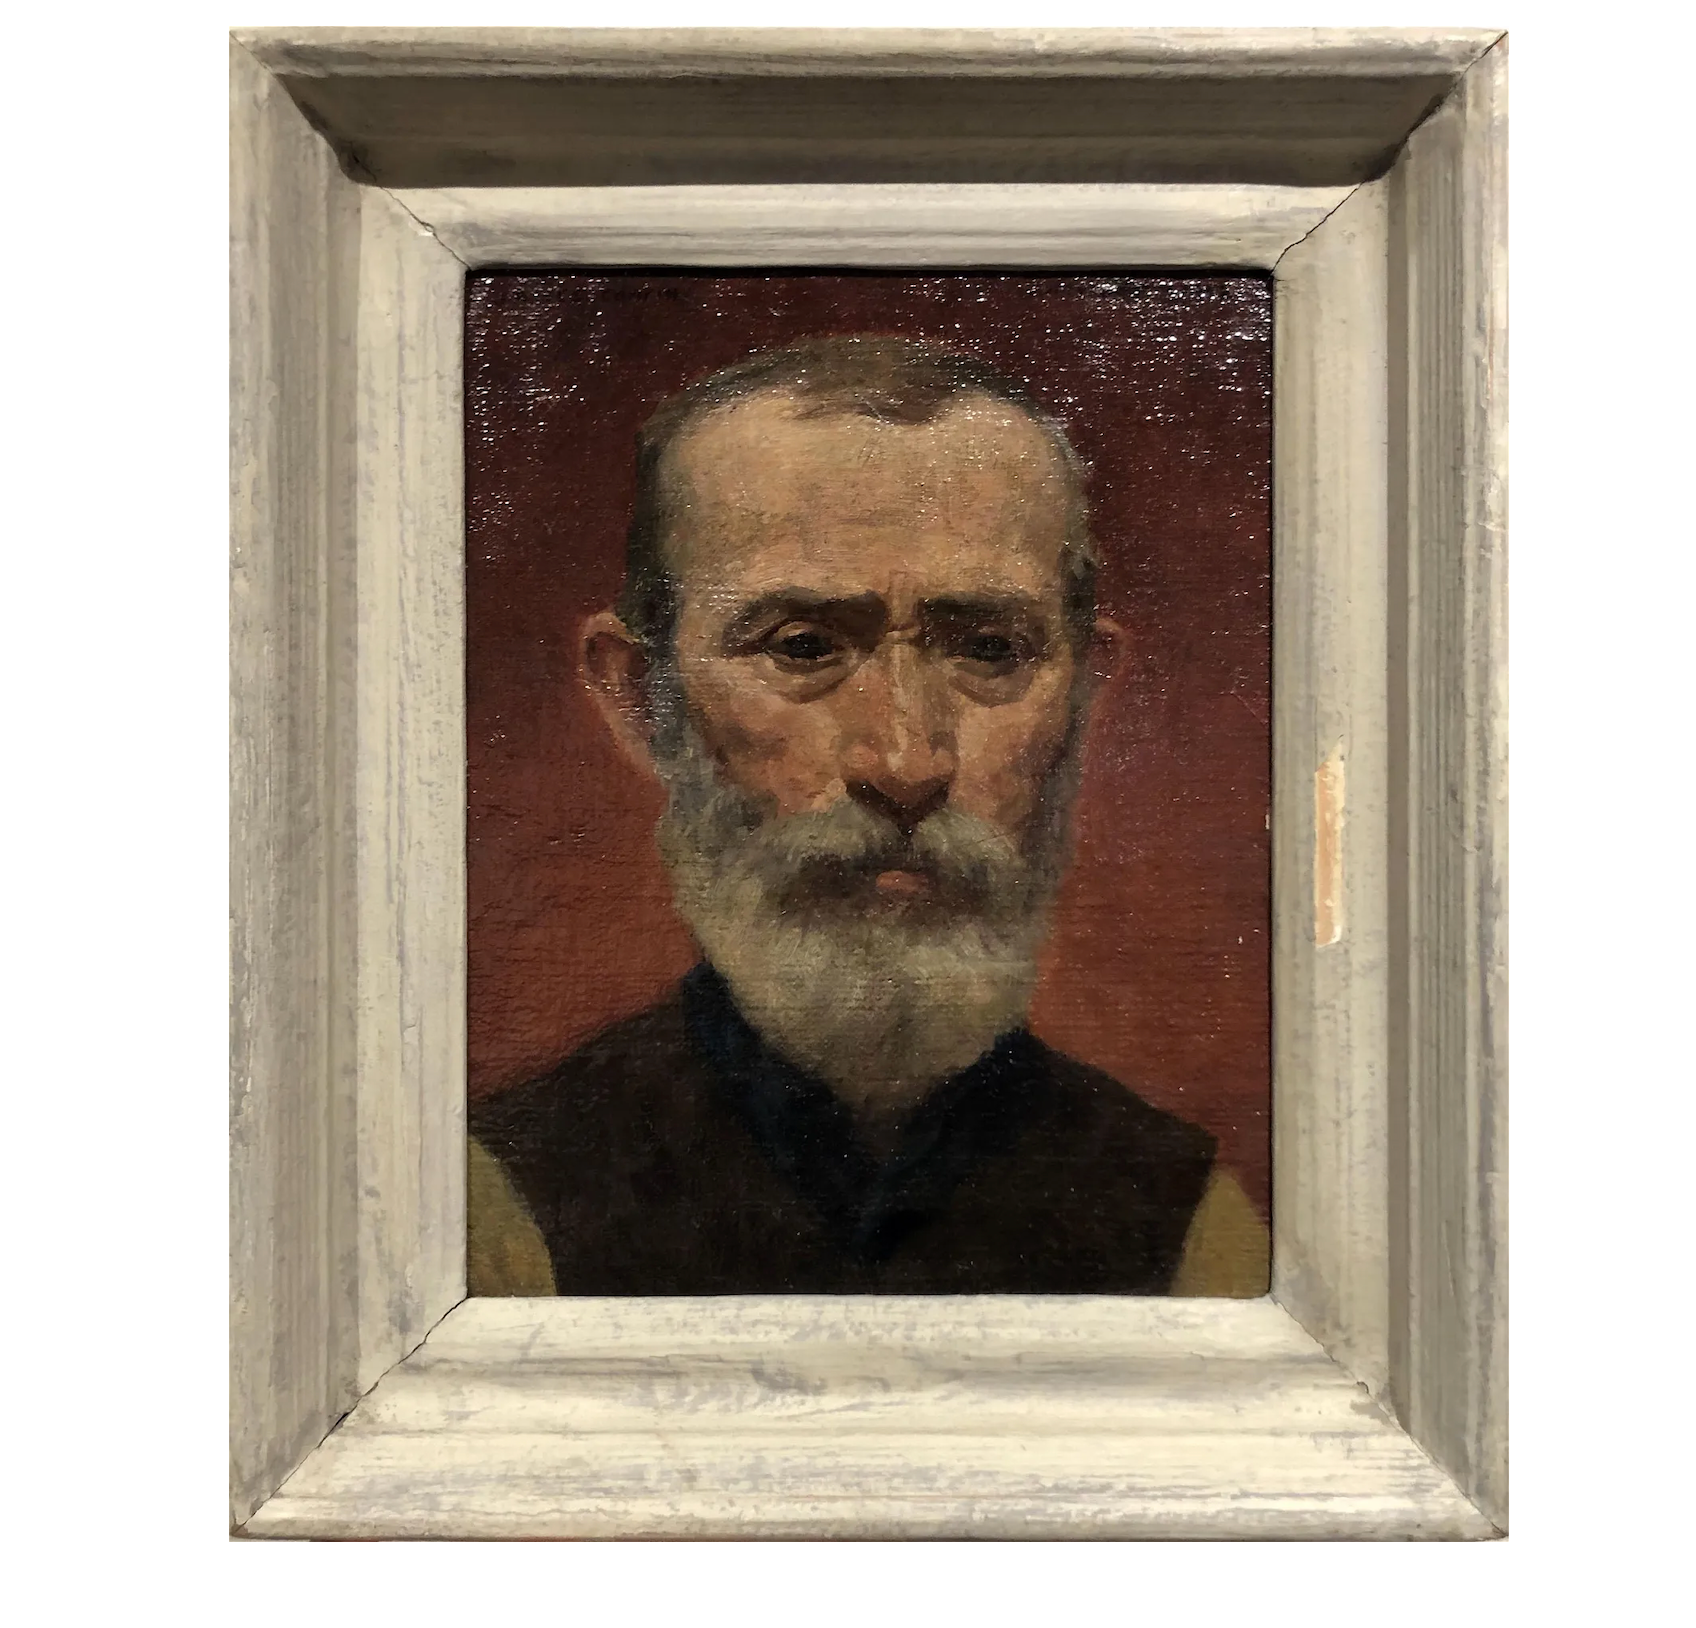 AW610: : James Ormsbee Chapin C 1912-  Oil on Canvas - Impressionist Portrait